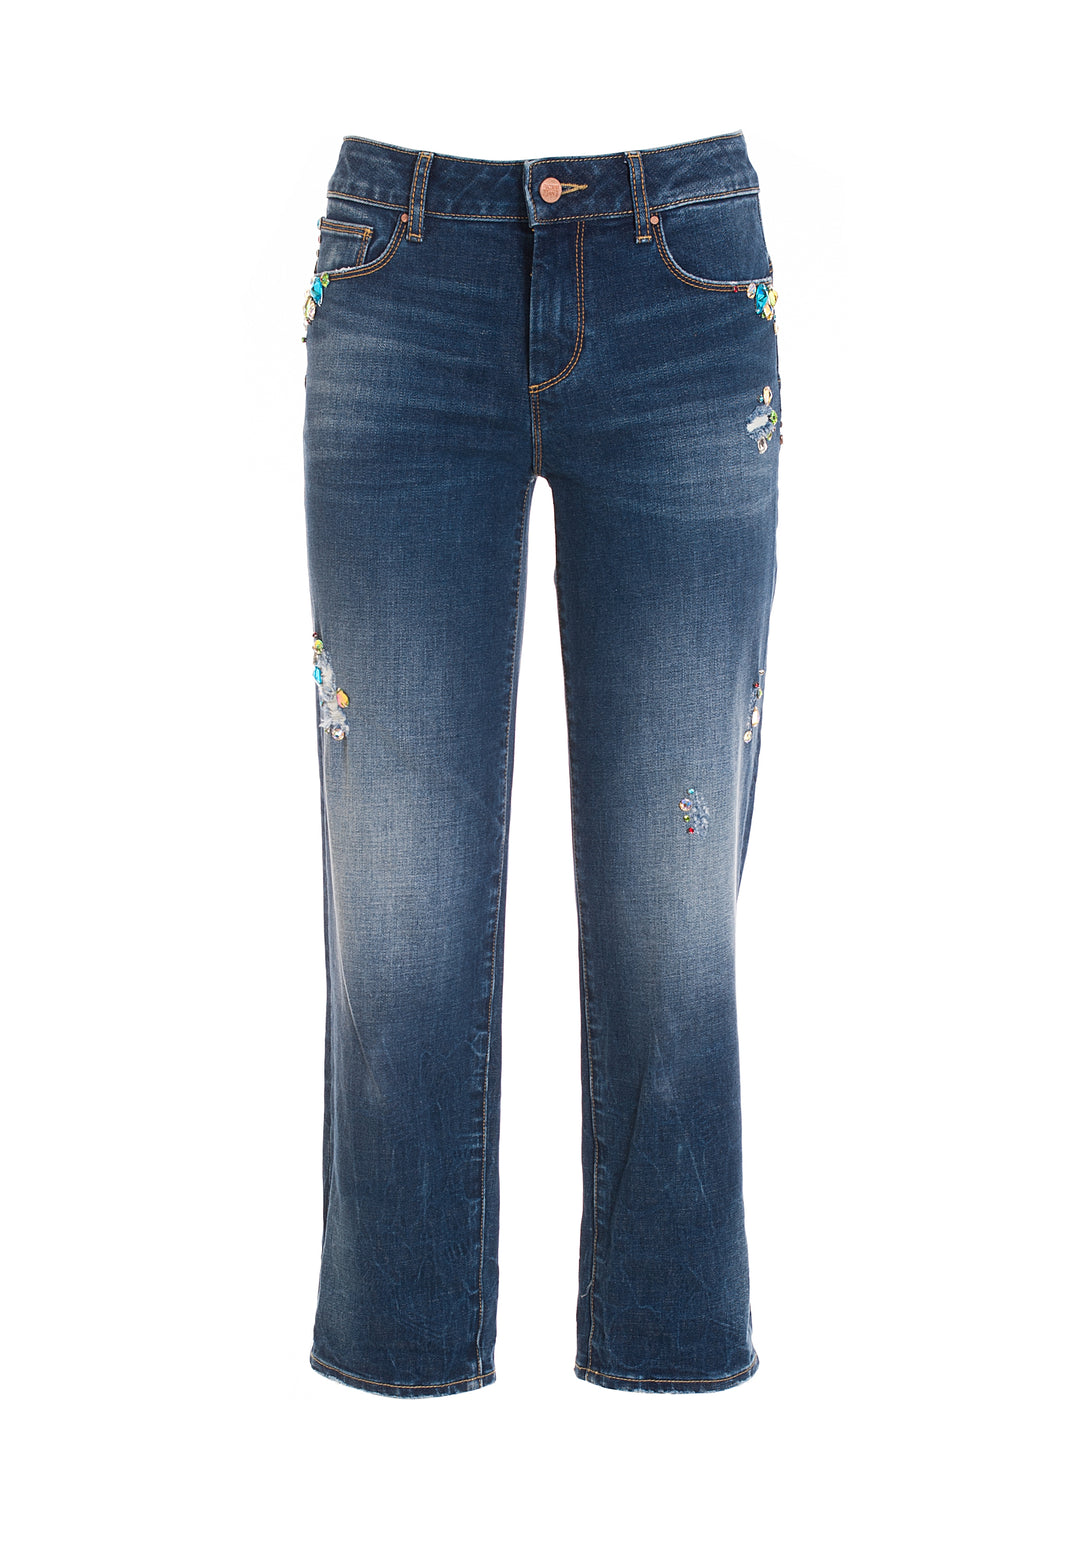 Jeans cropped with perfect shape effect made in denim with strong wash